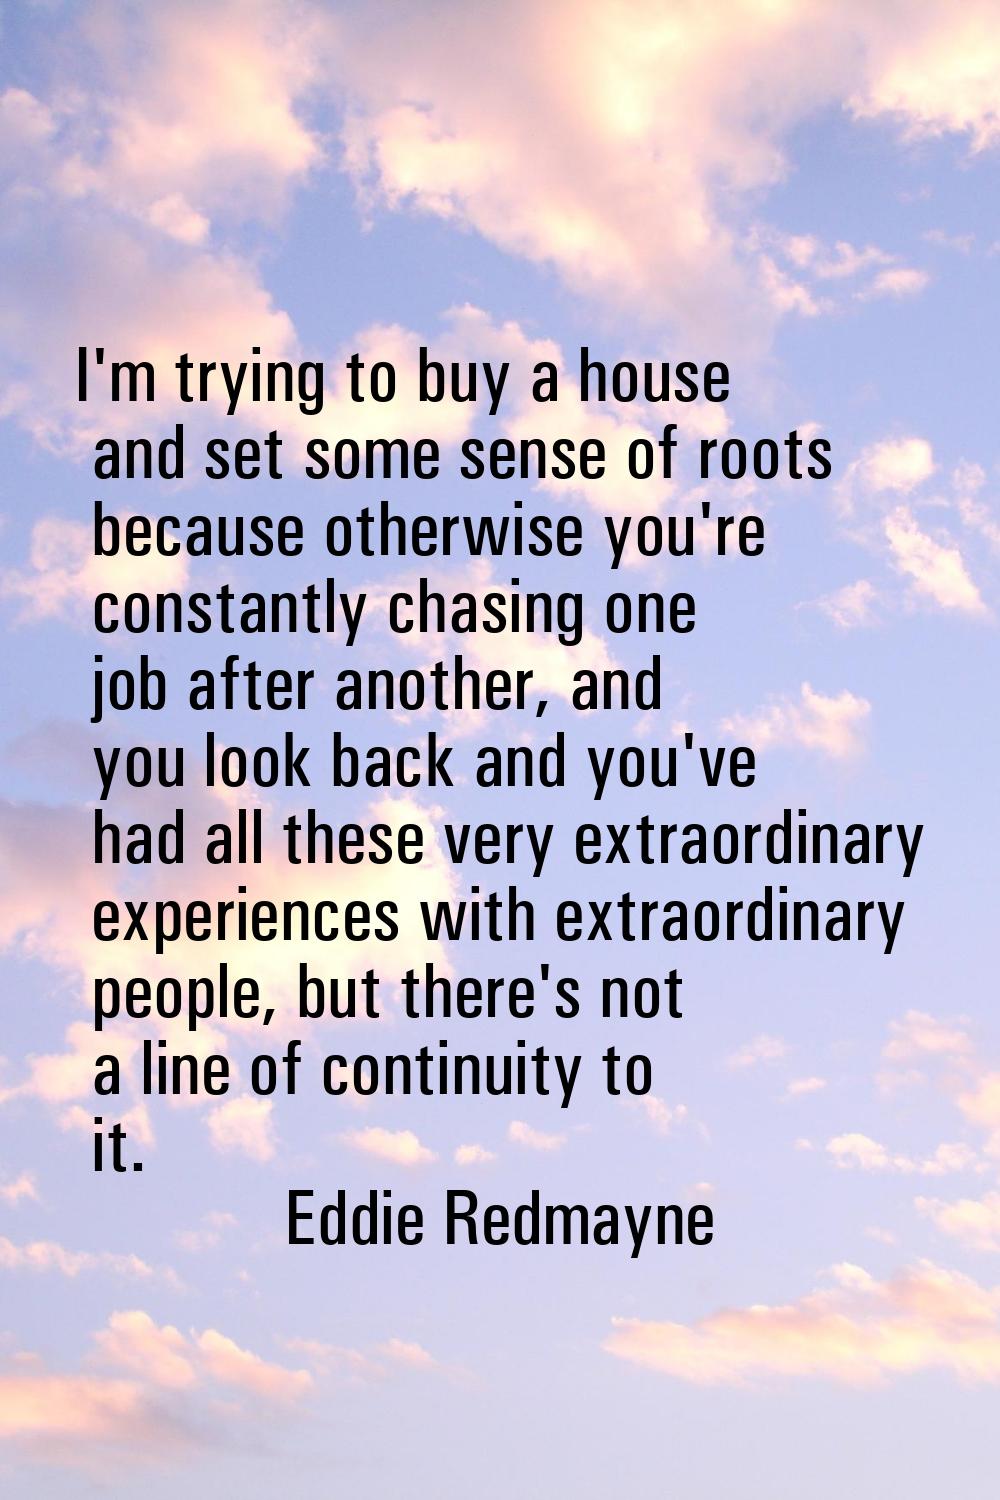 I'm trying to buy a house and set some sense of roots because otherwise you're constantly chasing o